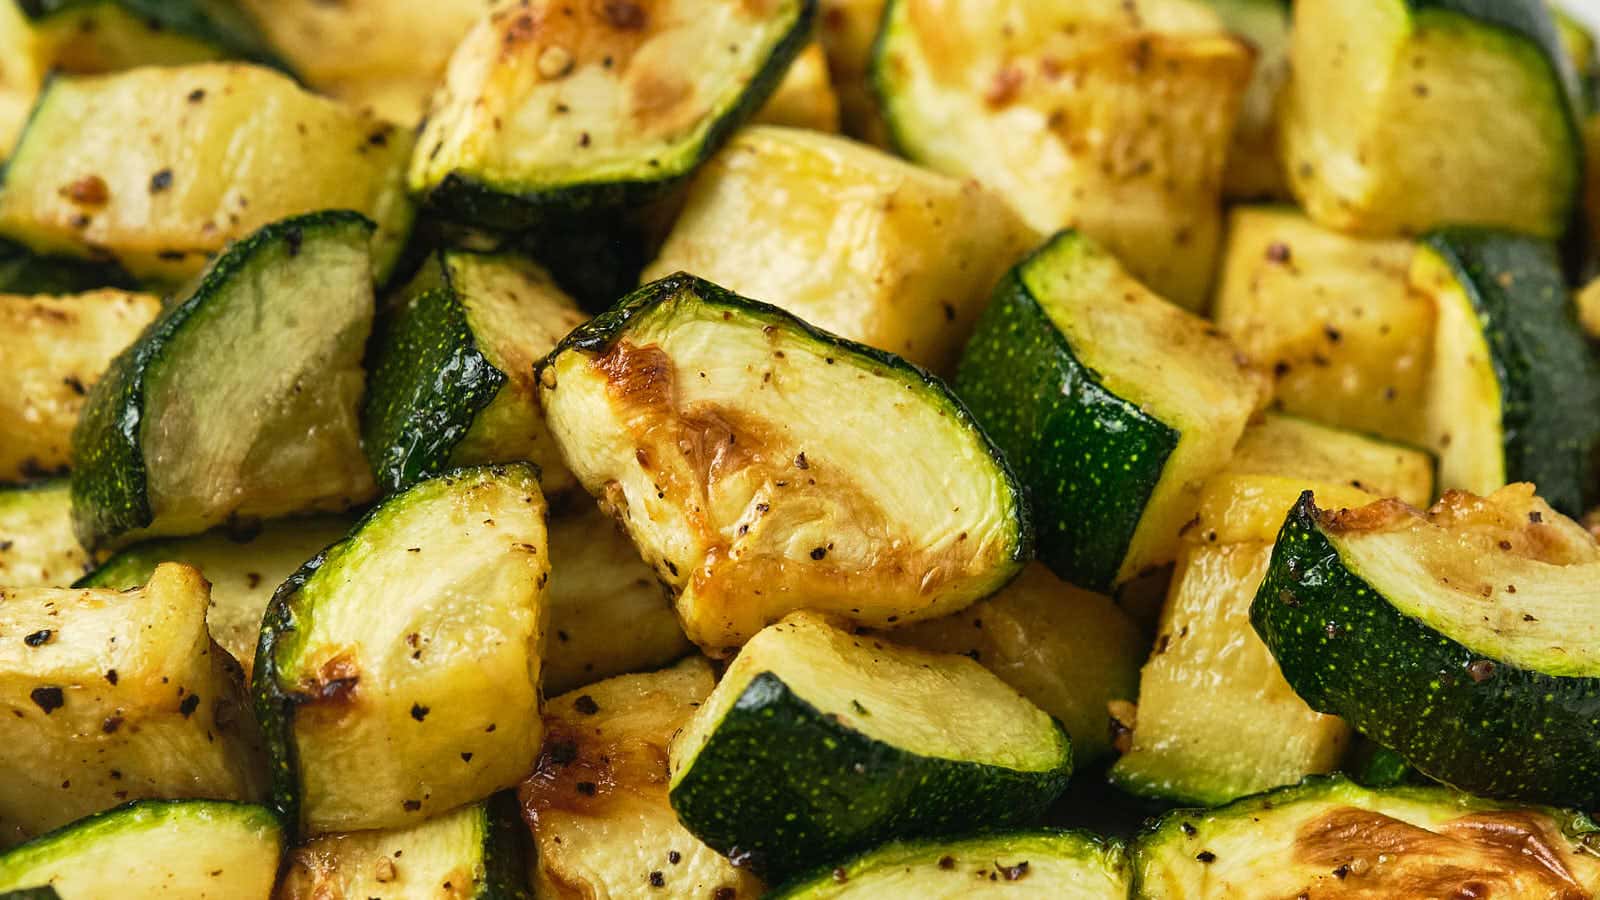 Air Fryer Zucchini recipe by Cheerful Cook.